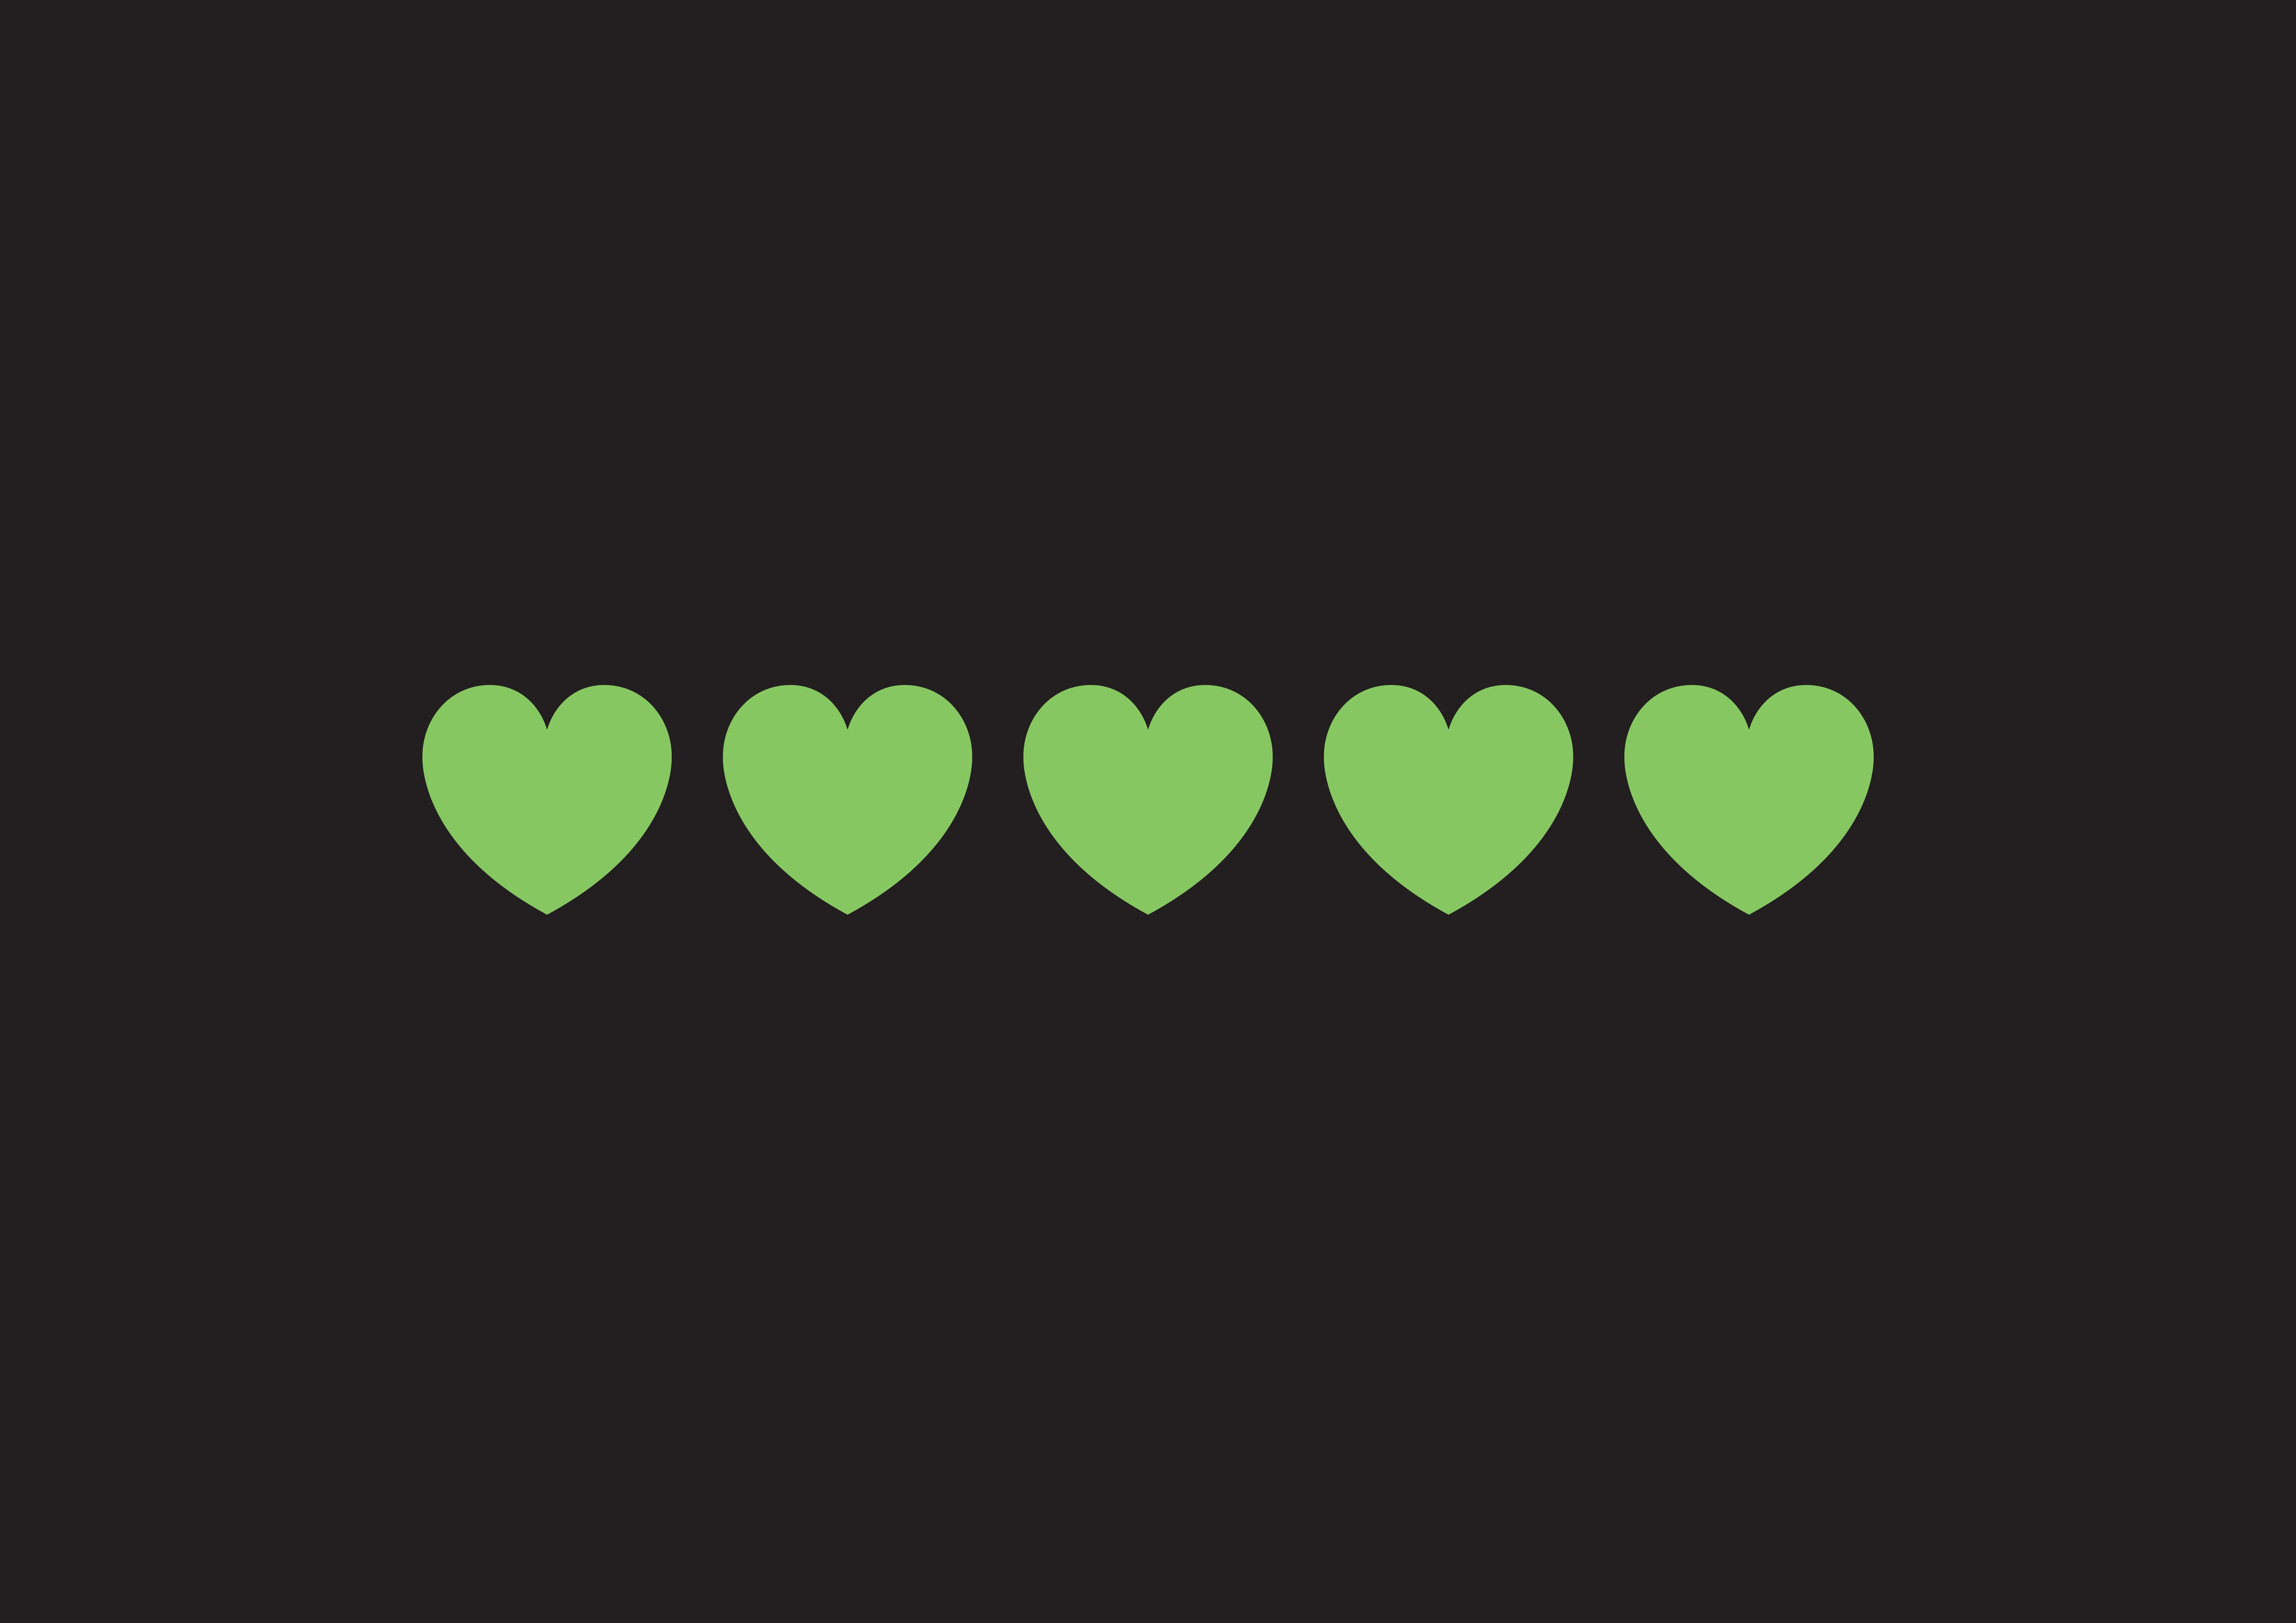 Green Hearts, to remember those who lost their lives